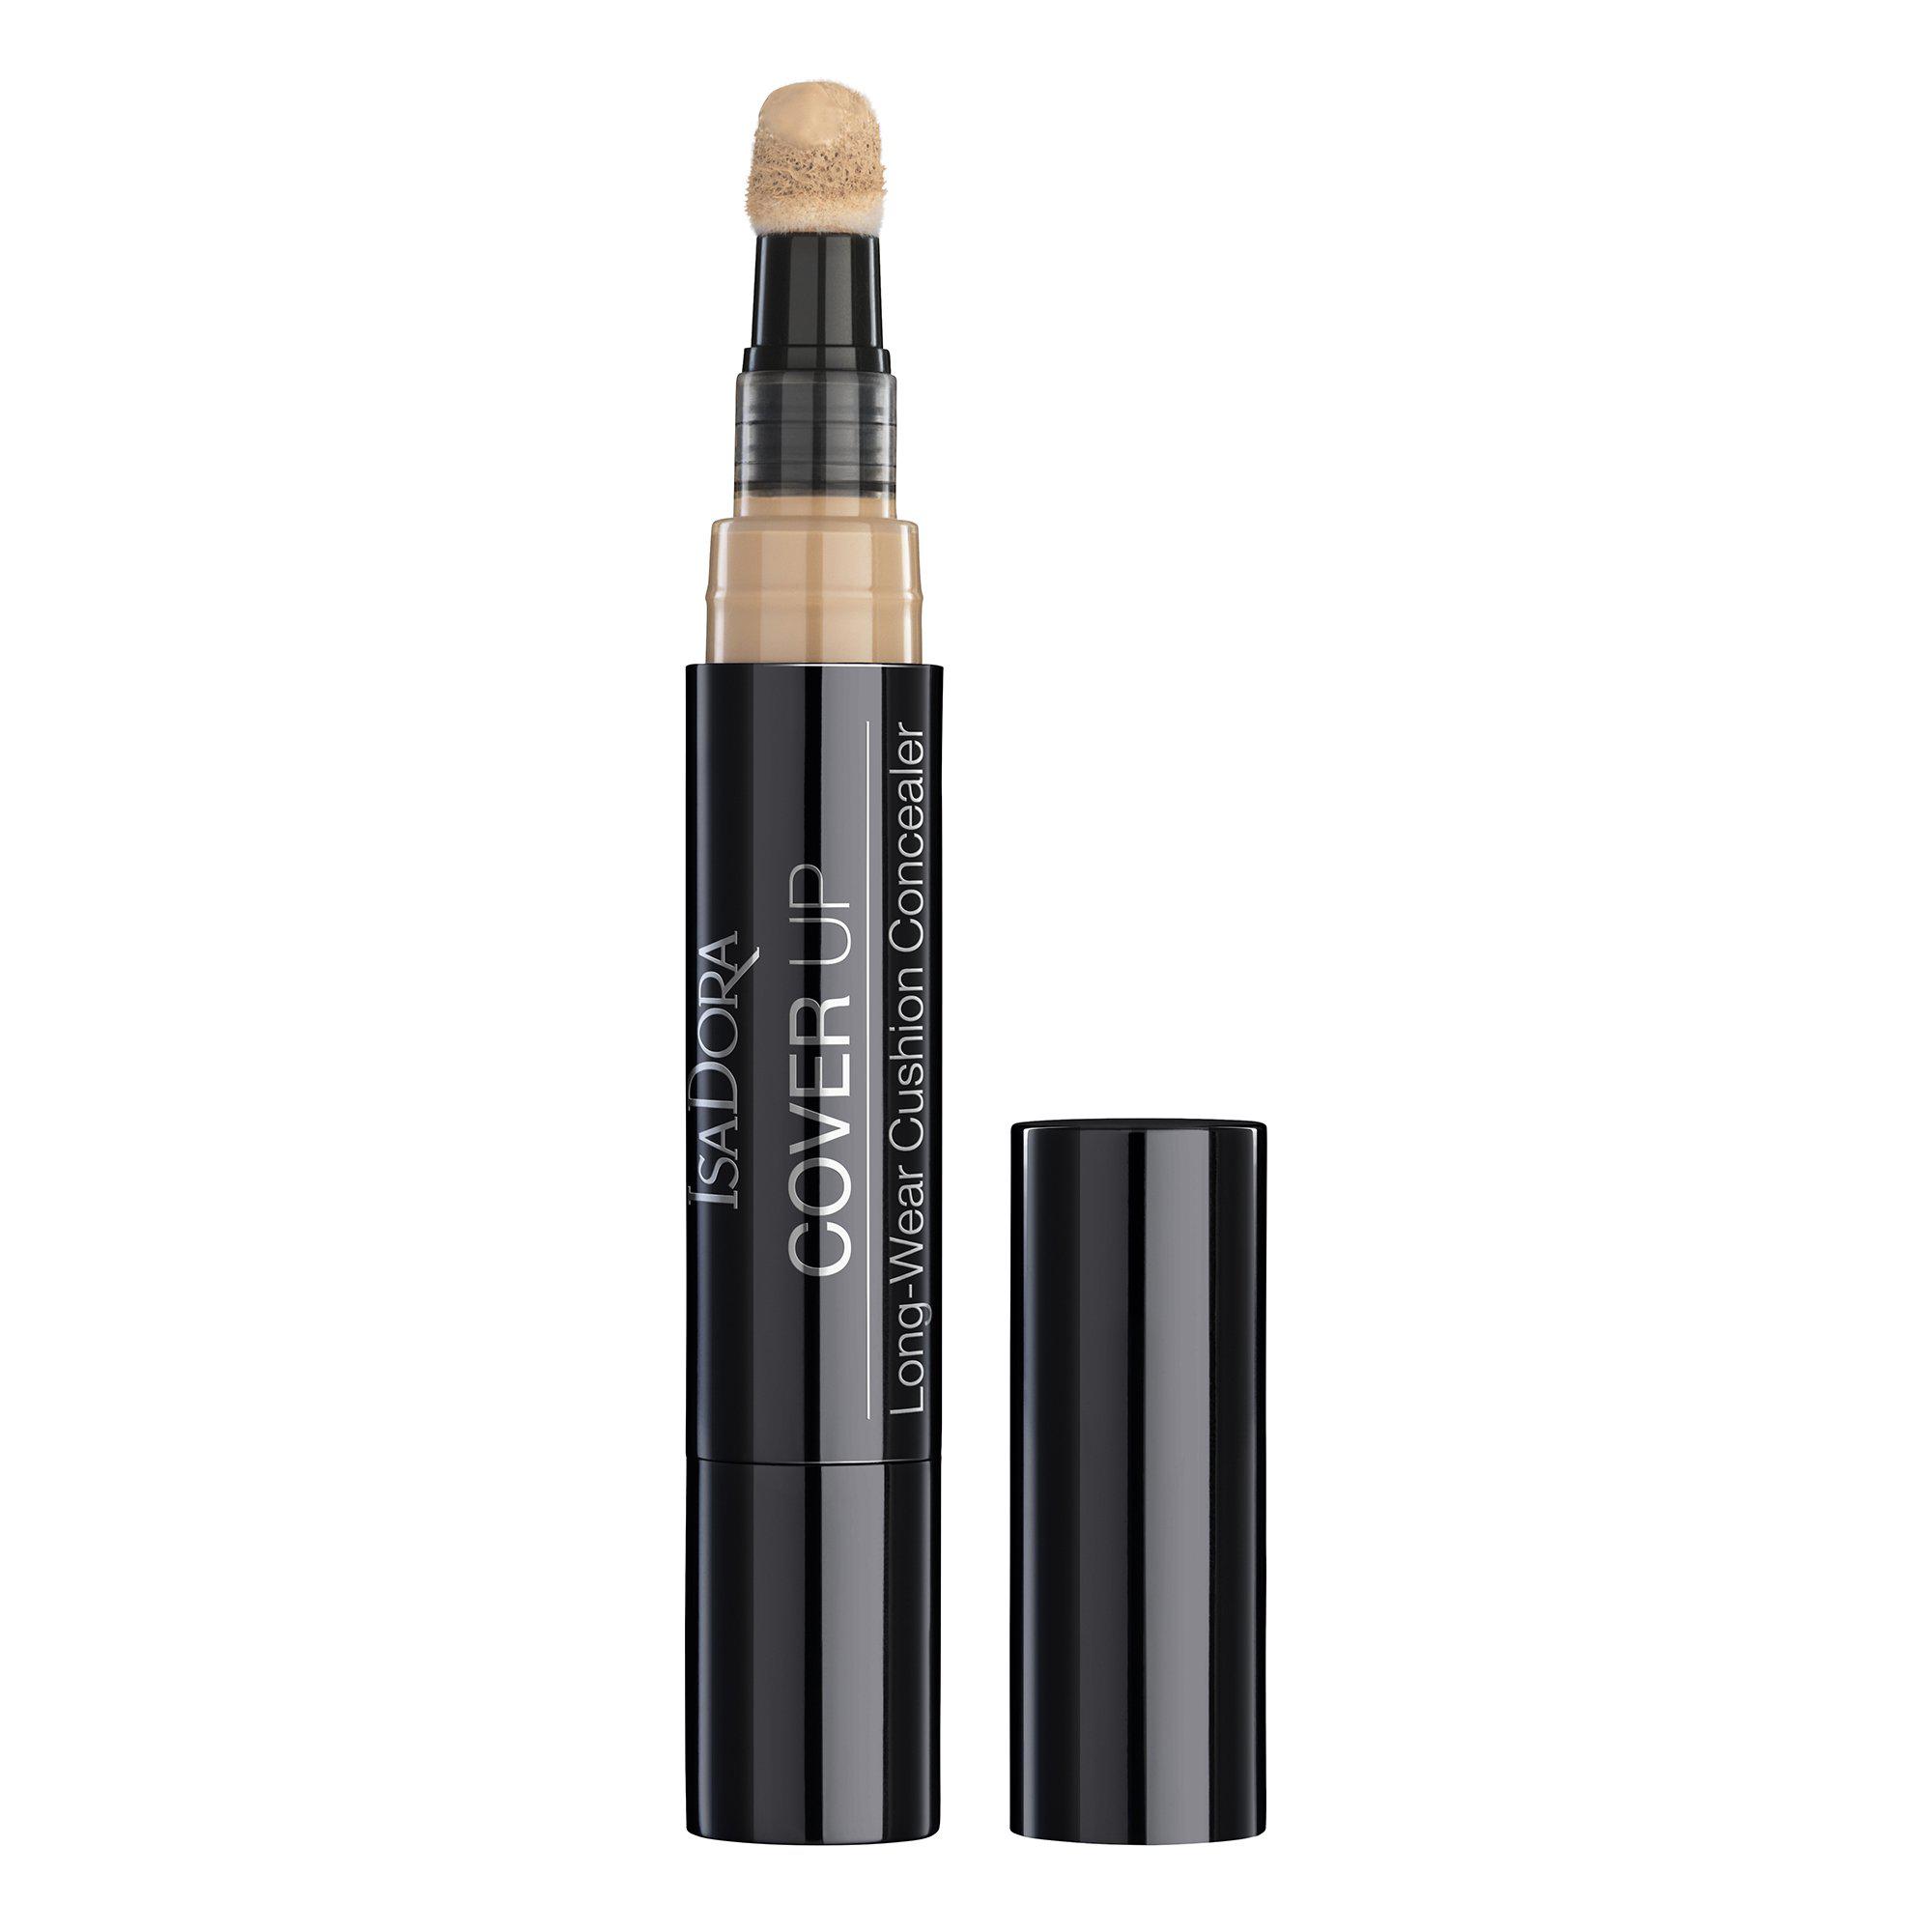 IsaDora Cover Up Long-Wear Cushion Concealer 52 Nude Sand